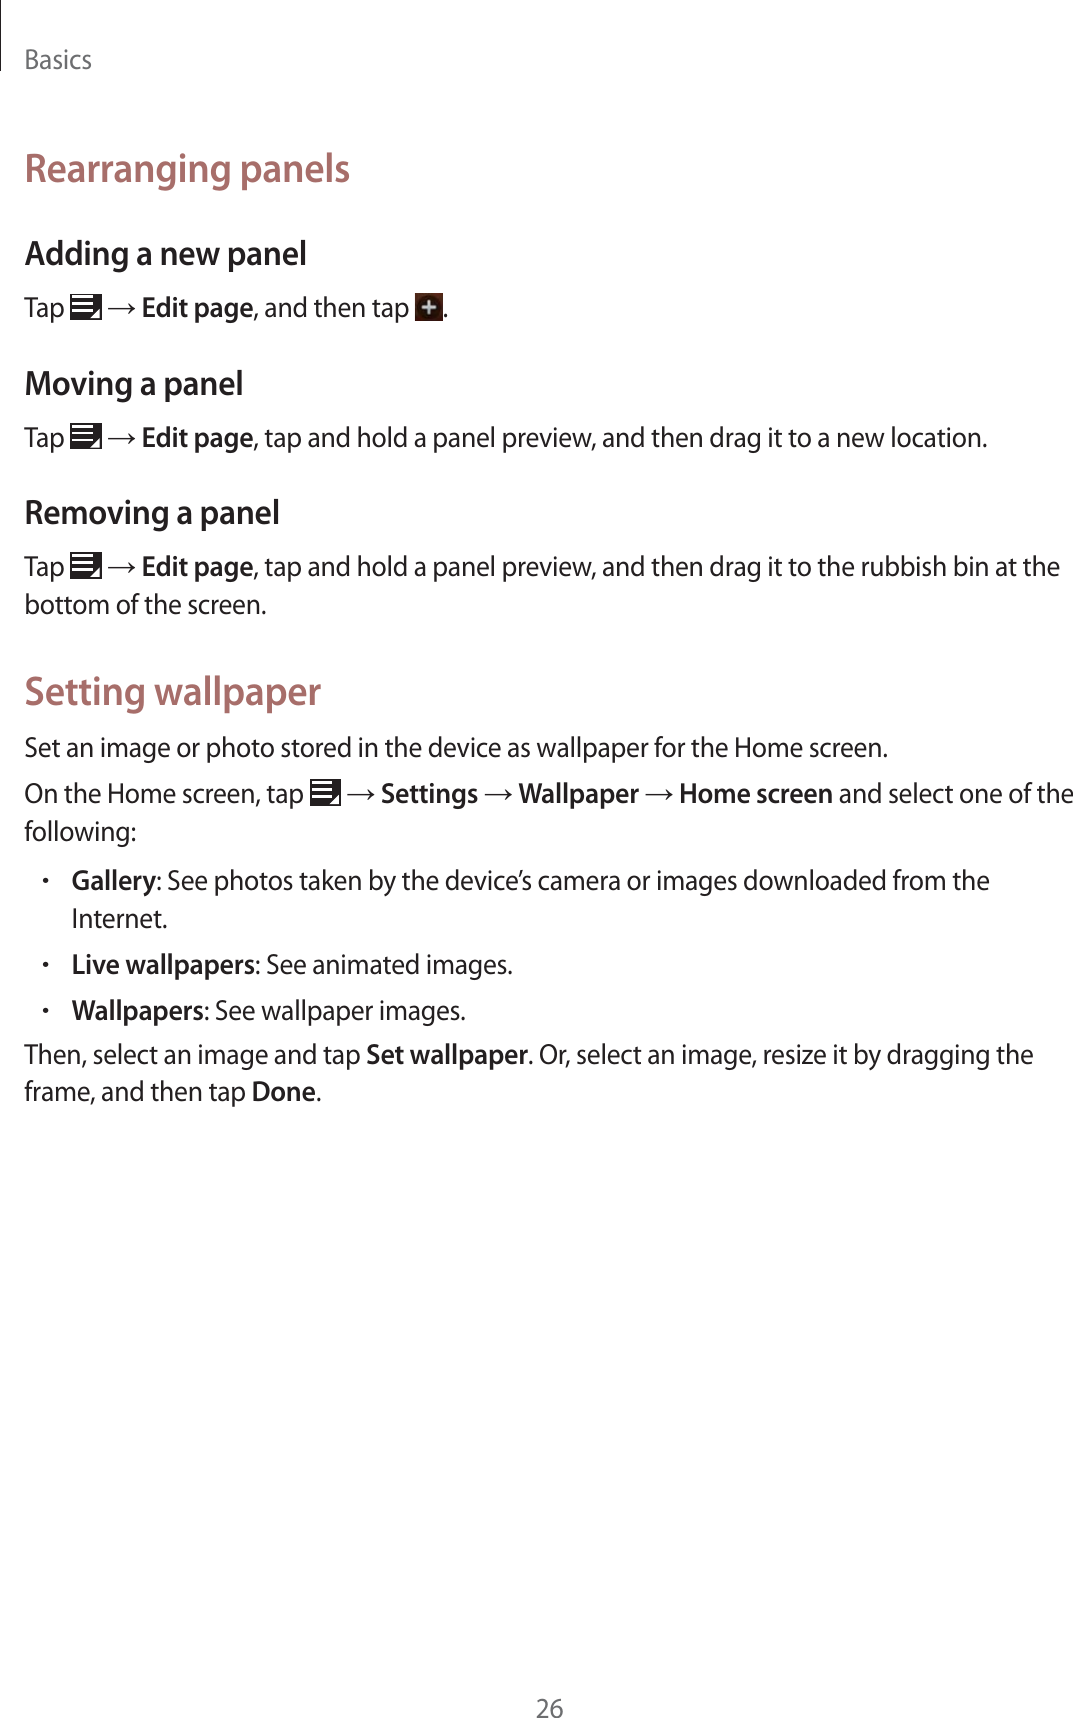 Basics26Rearranging panelsAdding a new panelTap   ĺ Edit page, and then tap  .Moving a panelTap   ĺ Edit page, tap and hold a panel preview, and then drag it to a new location.Removing a panelTap   ĺ Edit page, tap and hold a panel preview, and then drag it to the rubbish bin at the bottom of the screen.Setting wallpaperSet an image or photo stored in the device as wallpaper for the Home screen.On the Home screen, tap   ĺ Settings ĺ Wallpaper ĺ Home screen and select one of the following:rGallery: See photos taken by the device’s camera or images downloaded from the Internet.rLive wallpapers: See animated images.rWallpapers: See wallpaper images.Then, select an image and tap Set wallpaper. Or, select an image, resize it by dragging the frame, and then tap Done.